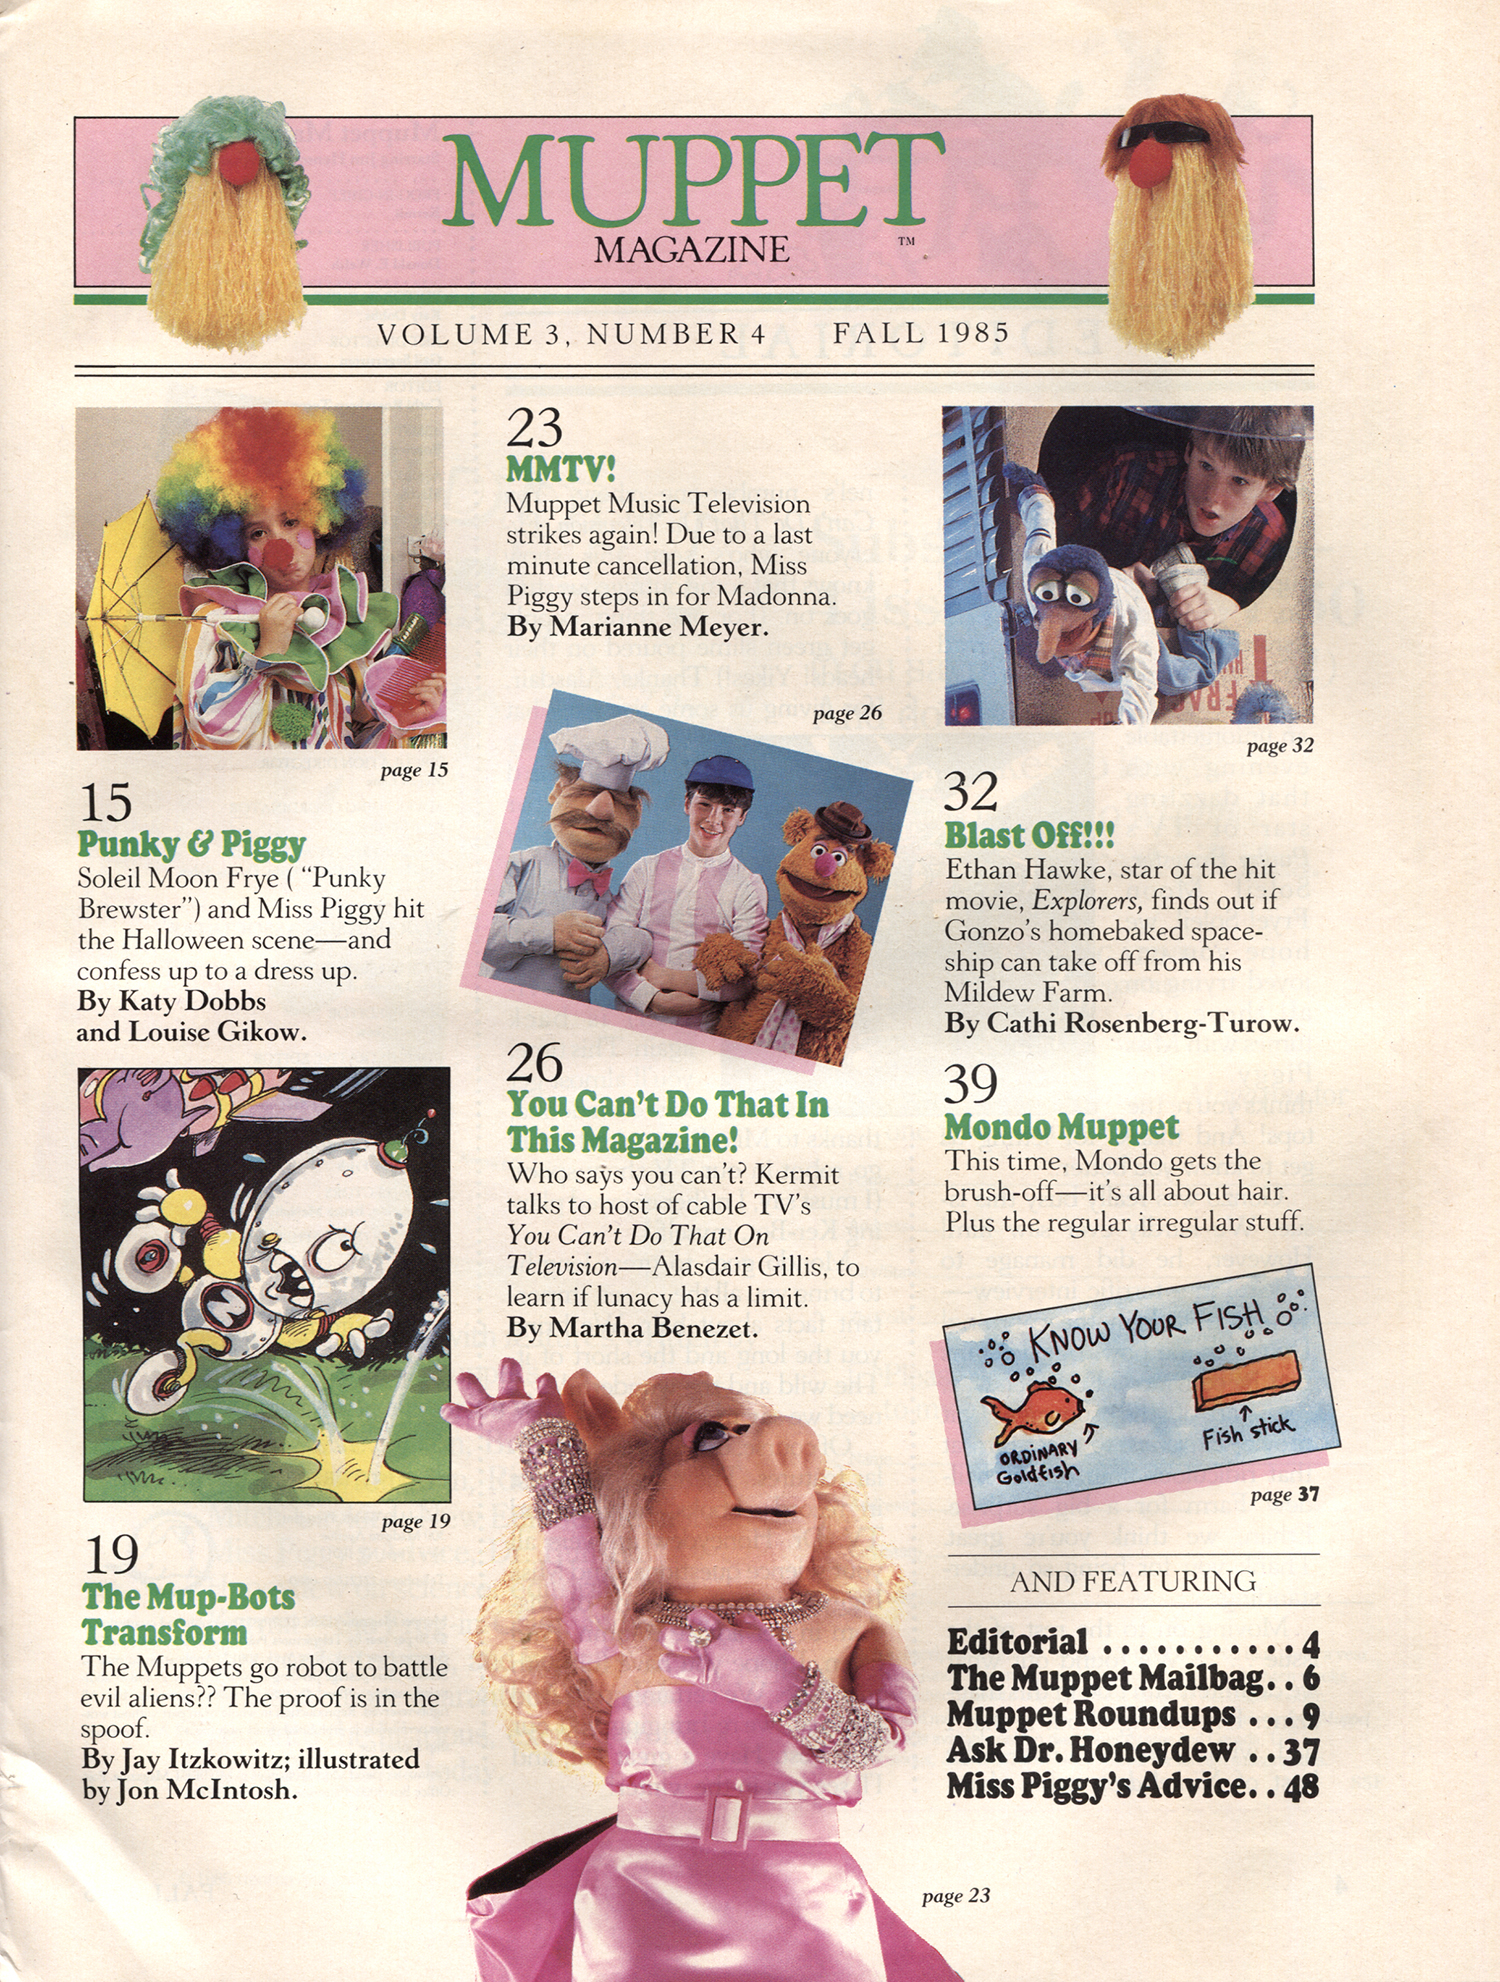 Muppet Magazine, Perfect Kid Reading in the 80s | Branded in the 80s